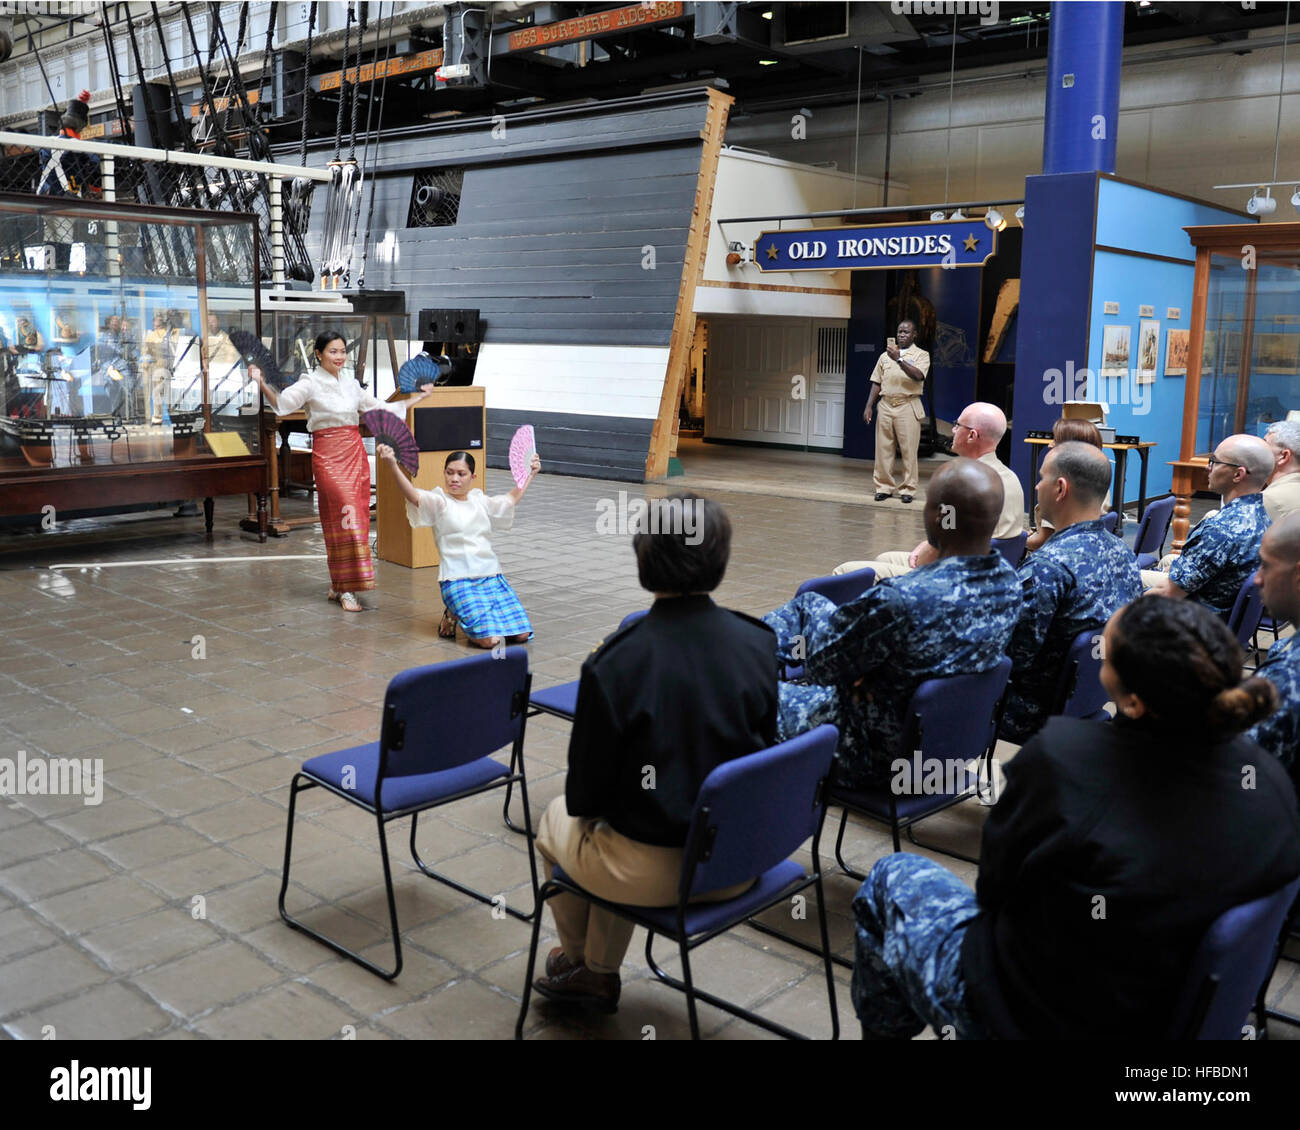 160524-N-ZA795-032 -- WASHINGTON (May 24, 2016) -- Naval District Washington (NDW) Deputy Public Affairs Officer Chatney Auger and Religious Programs 1st Class Maila Castillo, perform a traditional Philipino fan  dance as part of the NDW Asian American Pacific Islander Heritage Month celebration at the U.S. Navy Museum. Asian and Pacific American Heritage Week was first observed in May 1979, and then-President George Bush expanded the awareness campaign to the entire month in 1990. Congress officially decreed May as Asian American and Pacific Islander Heritage Month in 1992. (U.S. Navy photo b Stock Photo